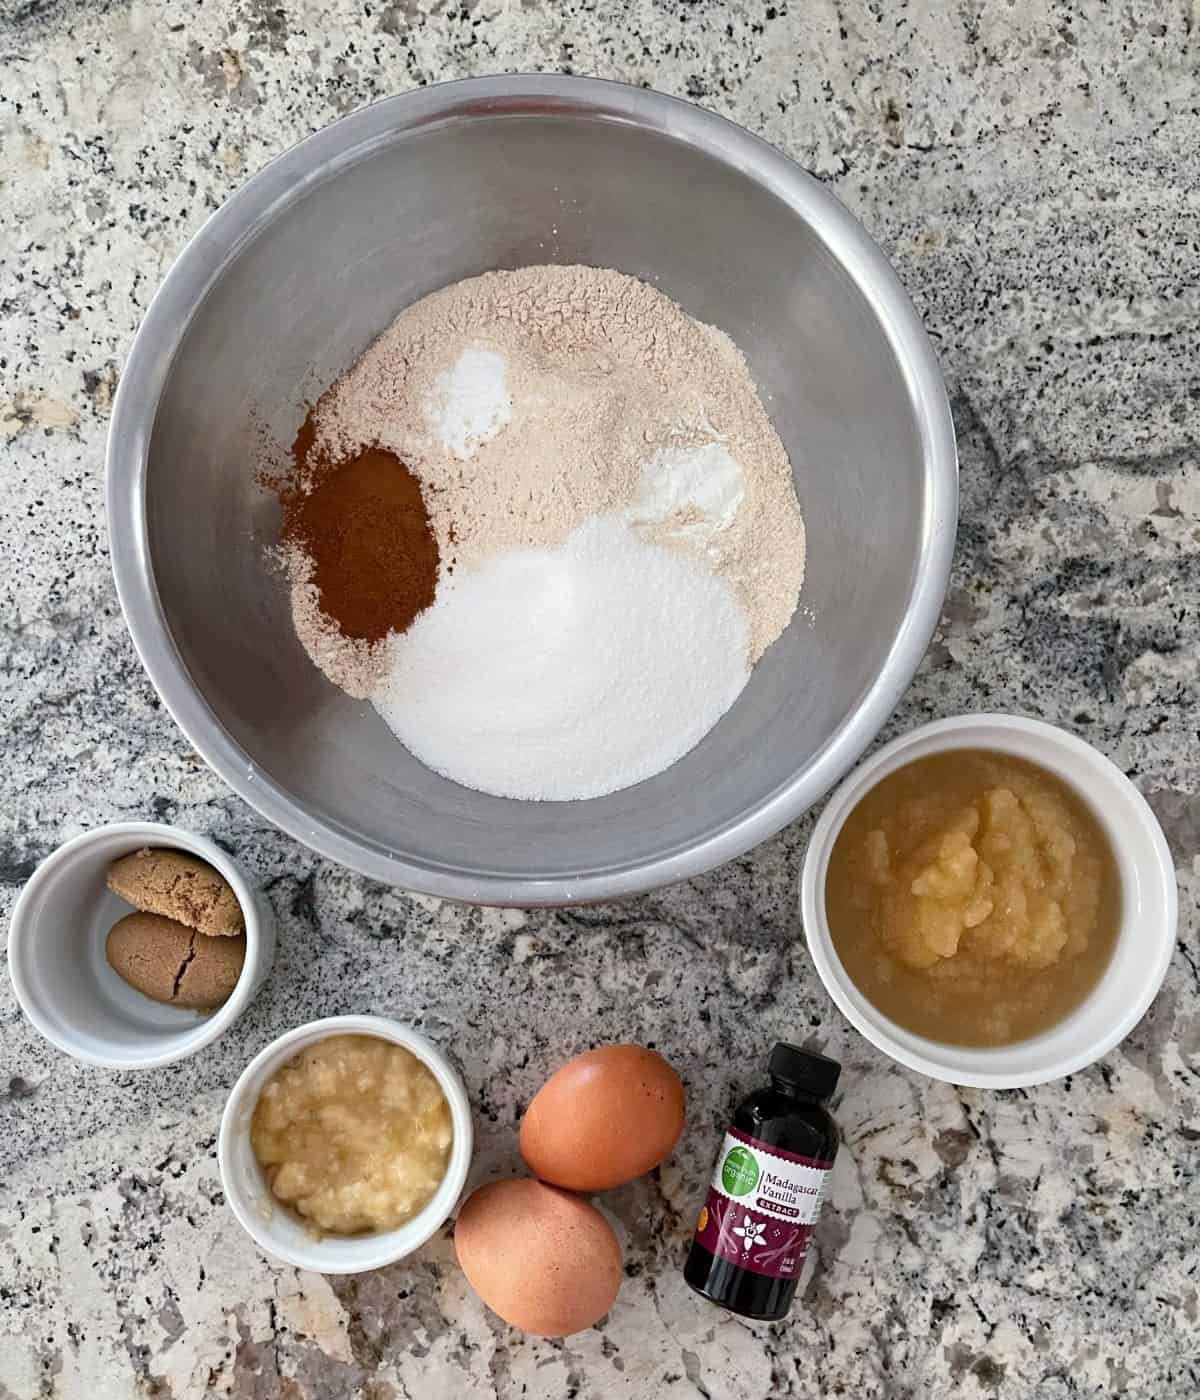 Muffin ingredients including a large mixing bowl with all-purpose flour, white whole wheat flour, cinnamon, Truvia Baking Blend, baking powder and baking soda, a small ramekin with mashed banana, unsweetened applesauce, 2 eggs, brown sugar and vanilla extract.